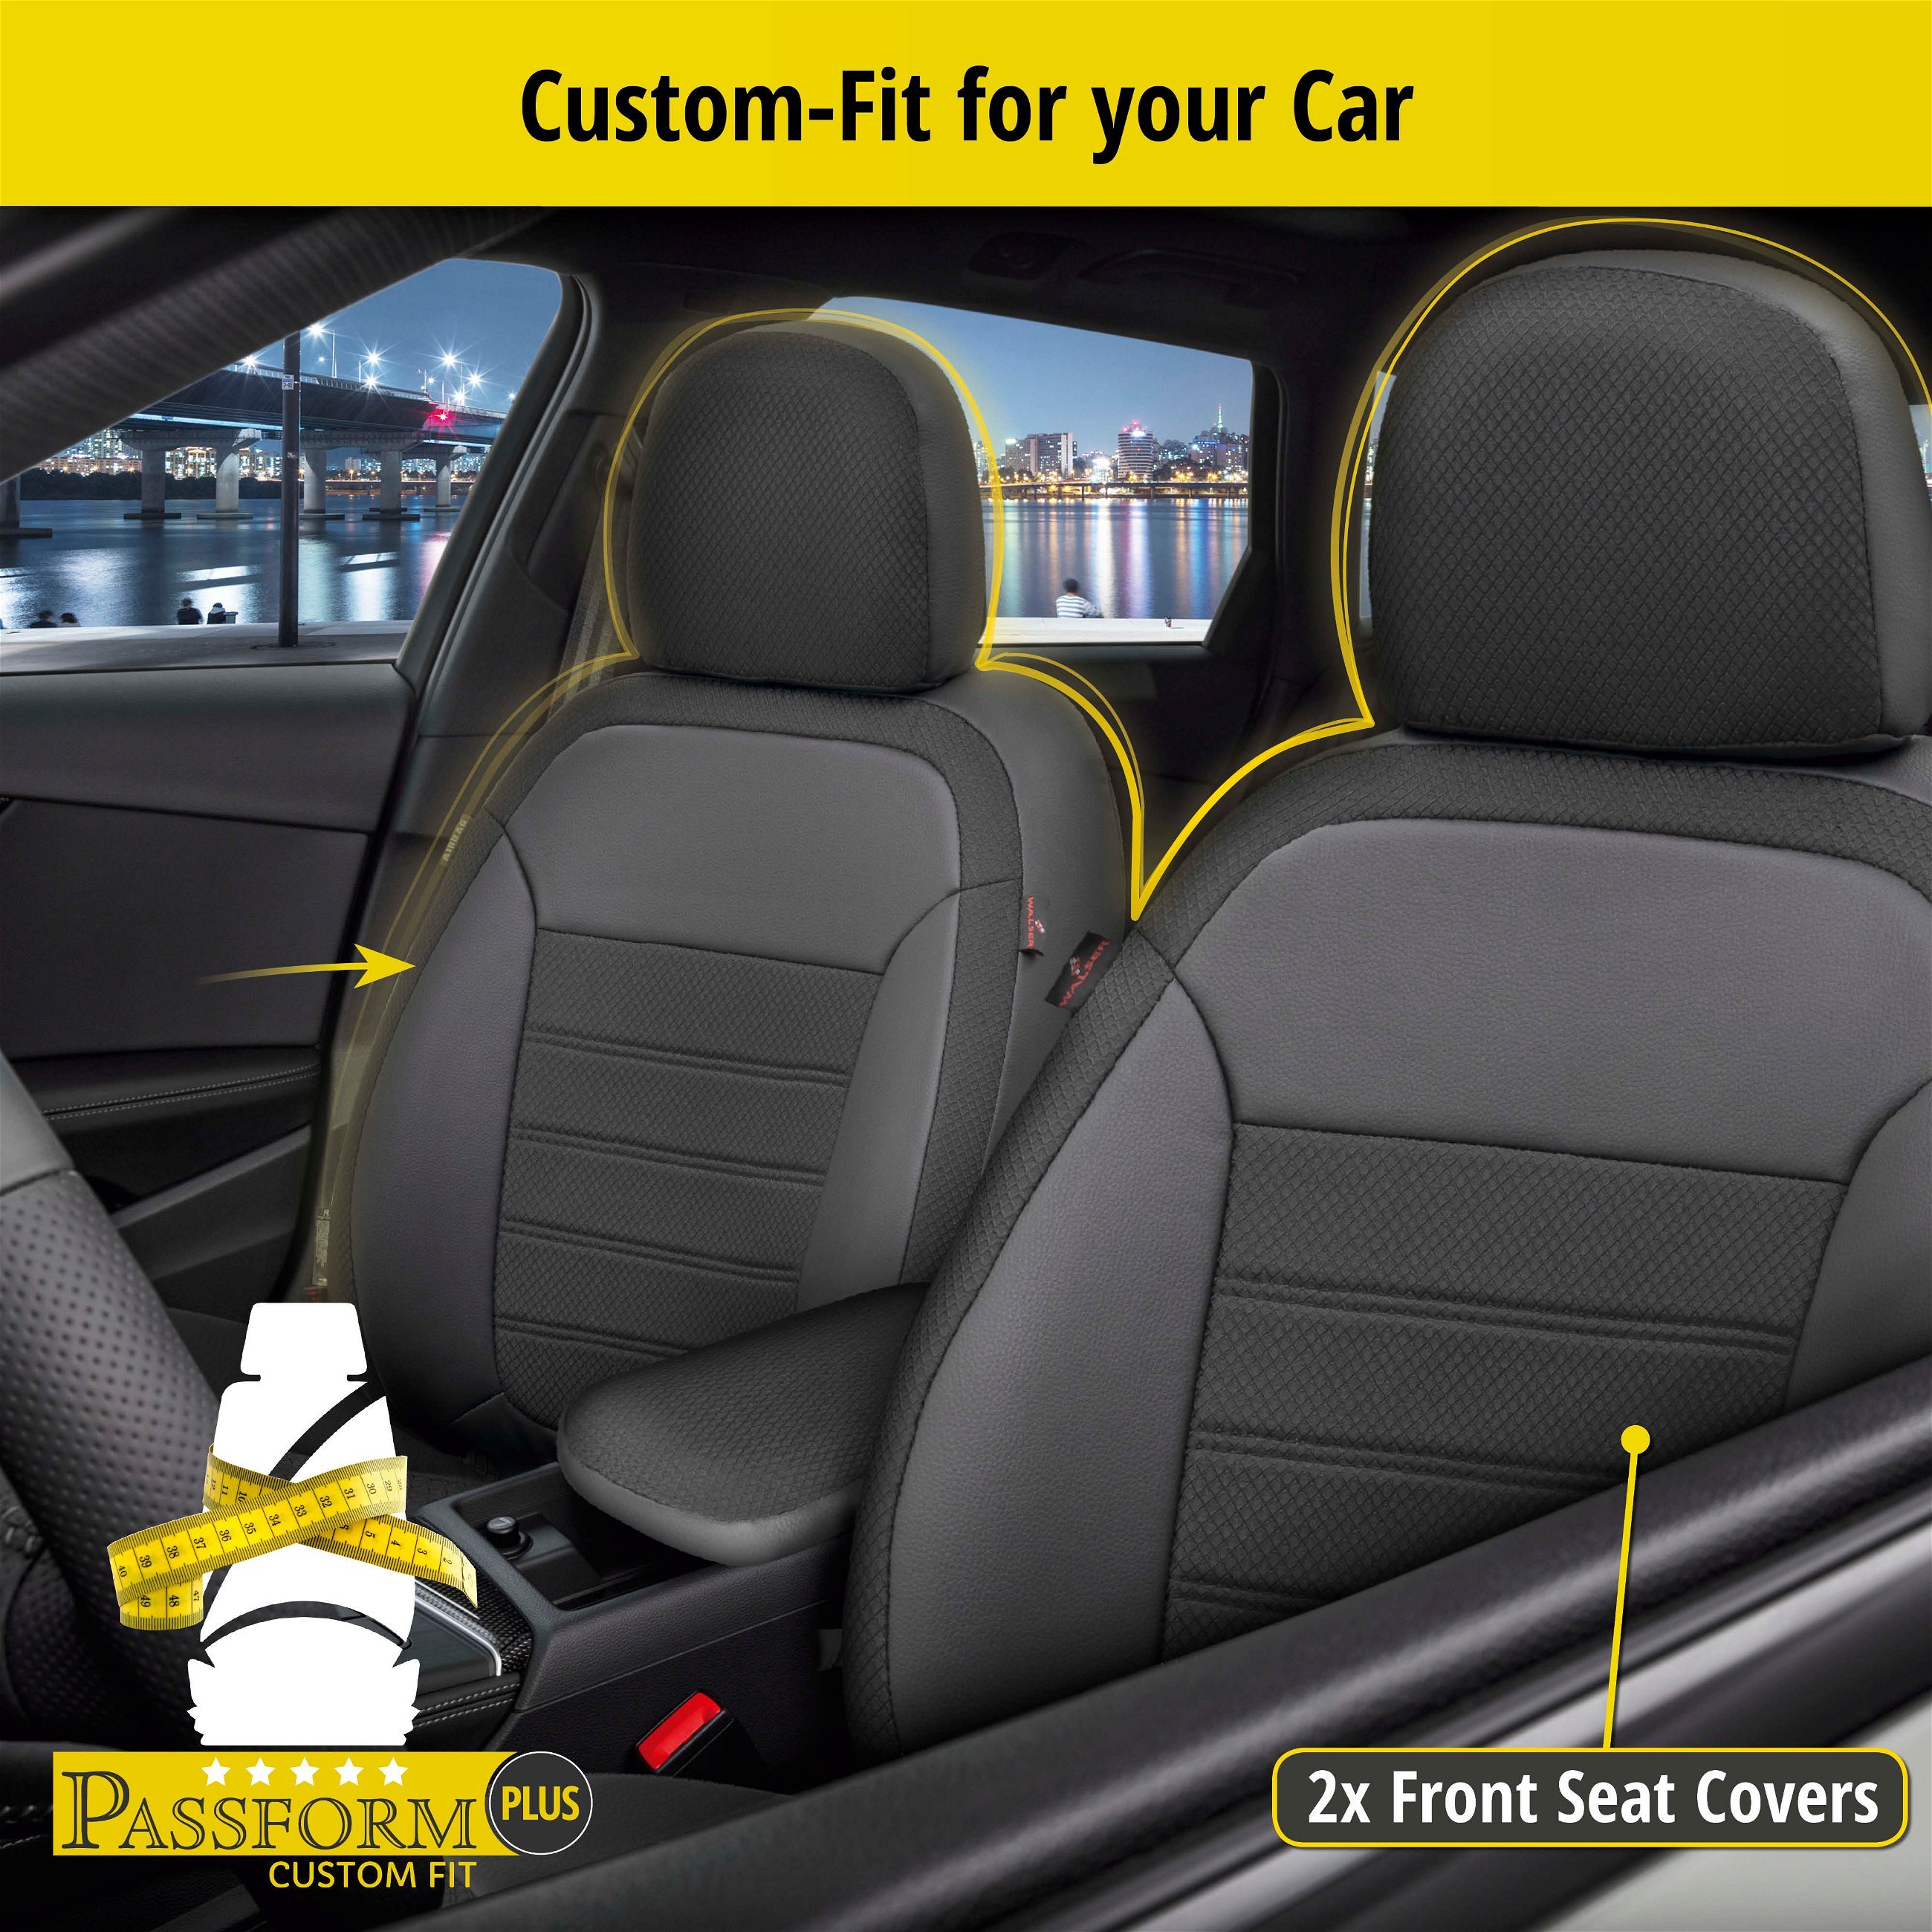 Seat Cover Aversa for Renault Clio III BR0/1, CR0/1 01/2005-12/2014, 2 seat covers for normal seats